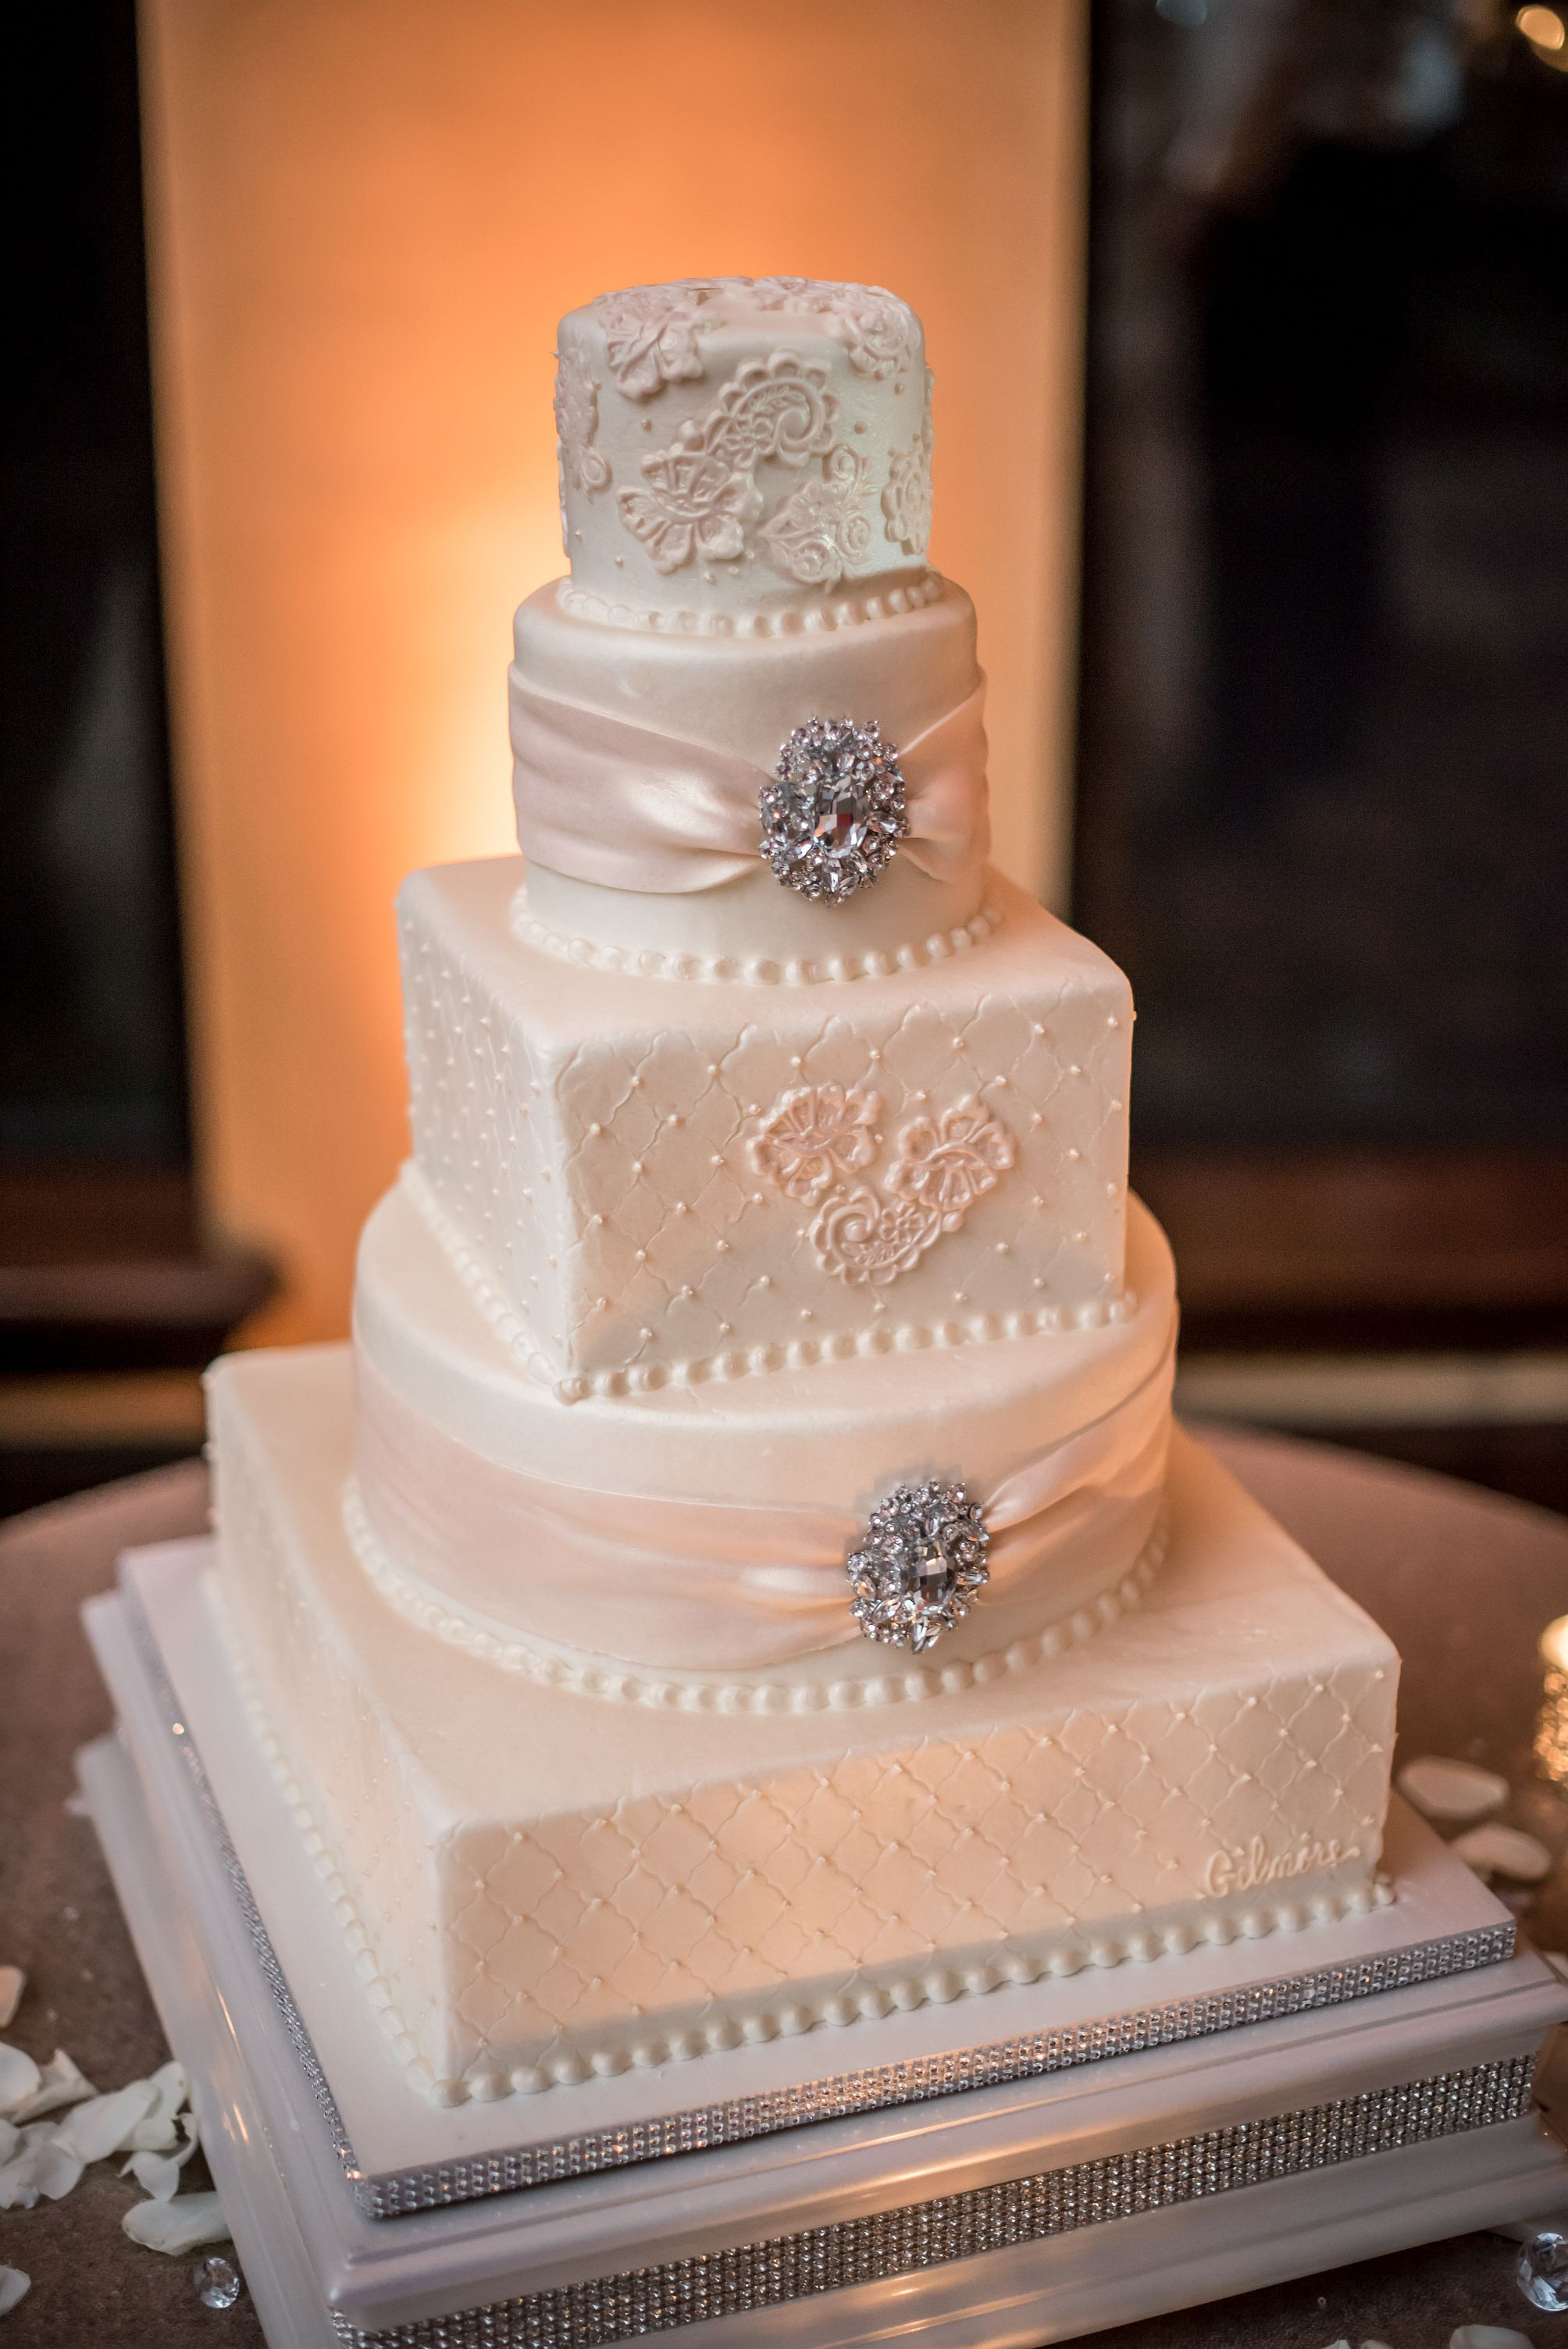 Top Tier Wedding Cakes
 Our beautiful wedding cake Top Tier Wedding Cakes in